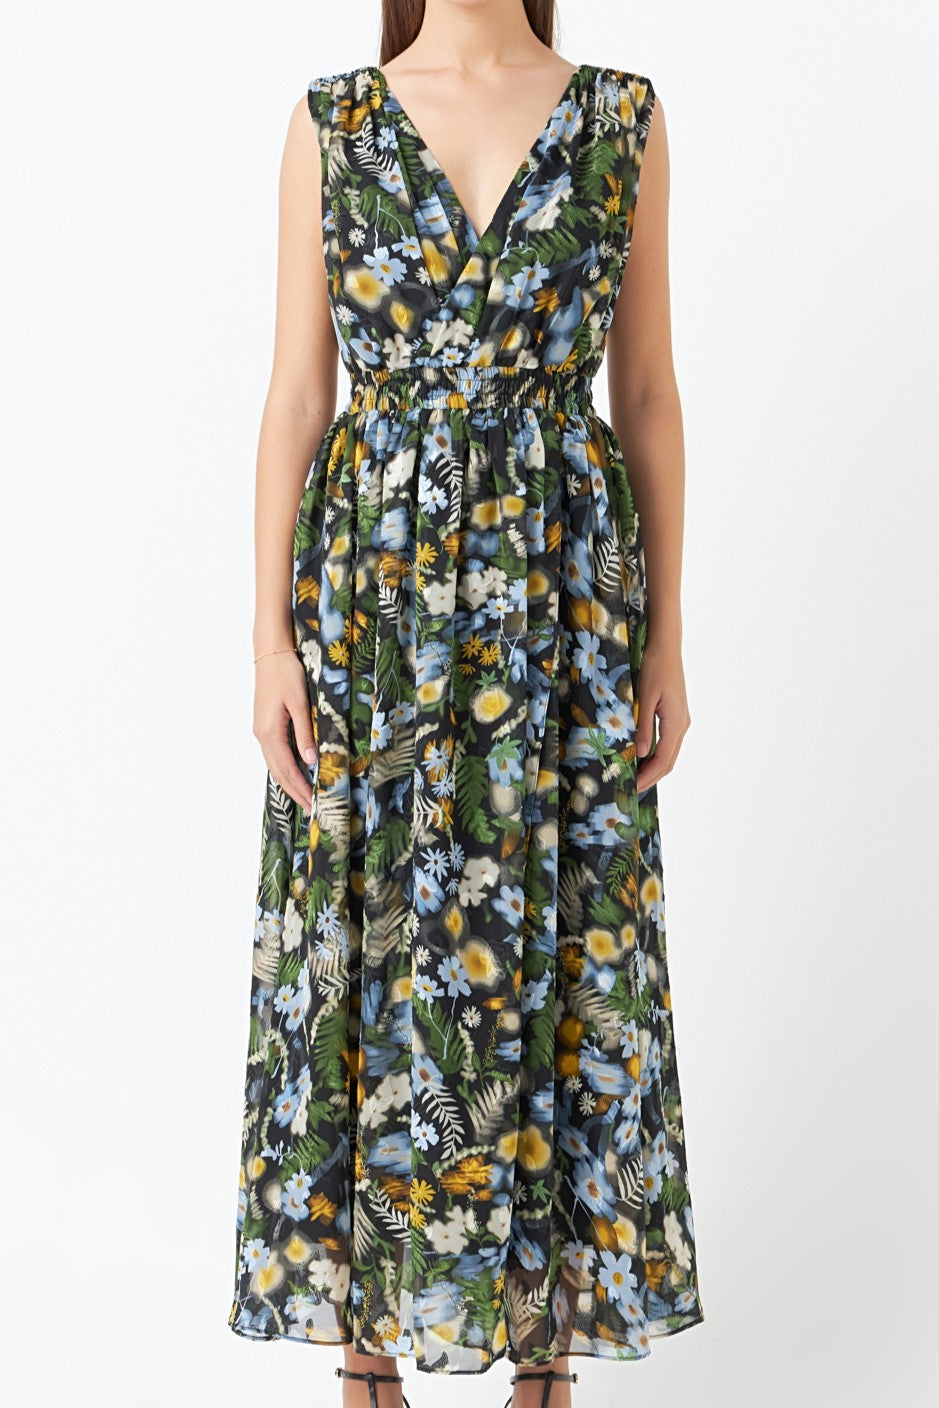 ENDLESS ROSE - Low Neck Floral Maxi Dress - DRESSES available at Objectrare